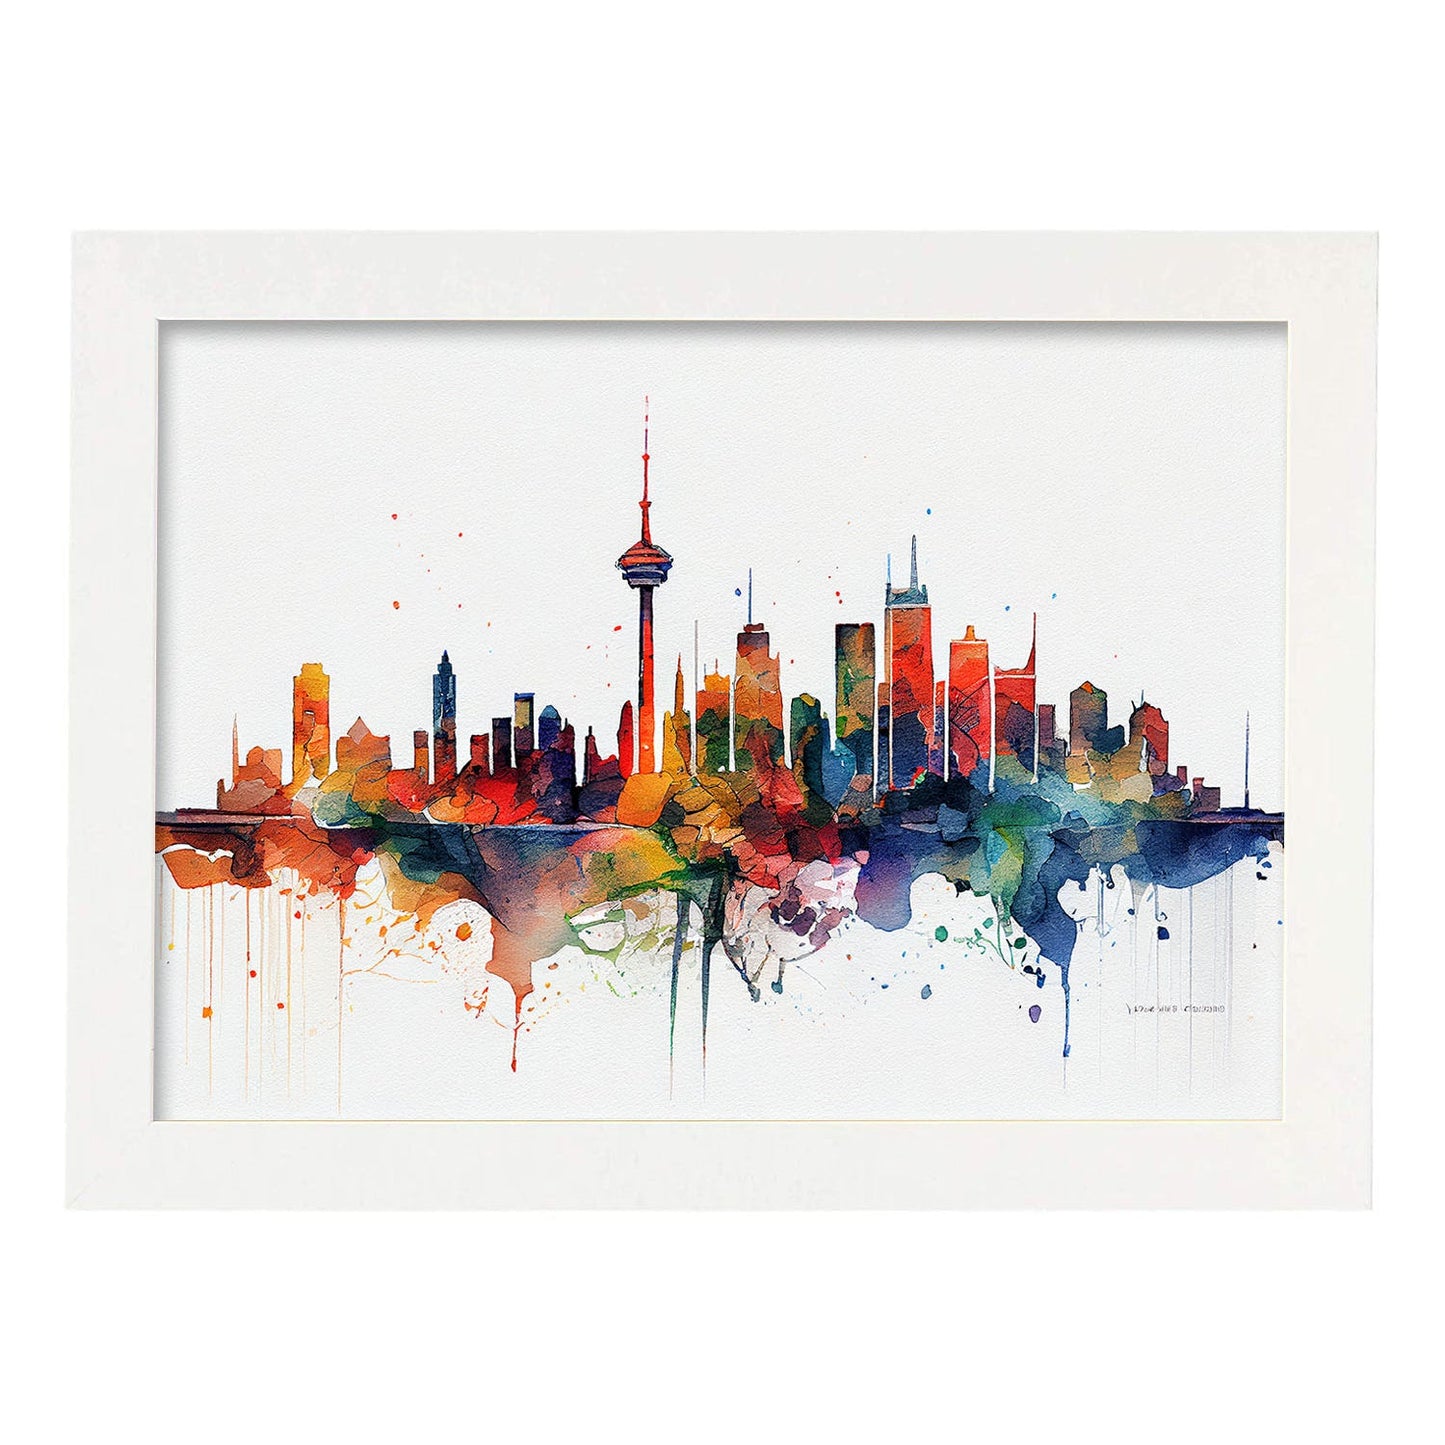 Nacnic watercolor of a skyline of the city of Toronto_2. Aesthetic Wall Art Prints for Bedroom or Living Room Design.-Artwork-Nacnic-A4-Marco Blanco-Nacnic Estudio SL